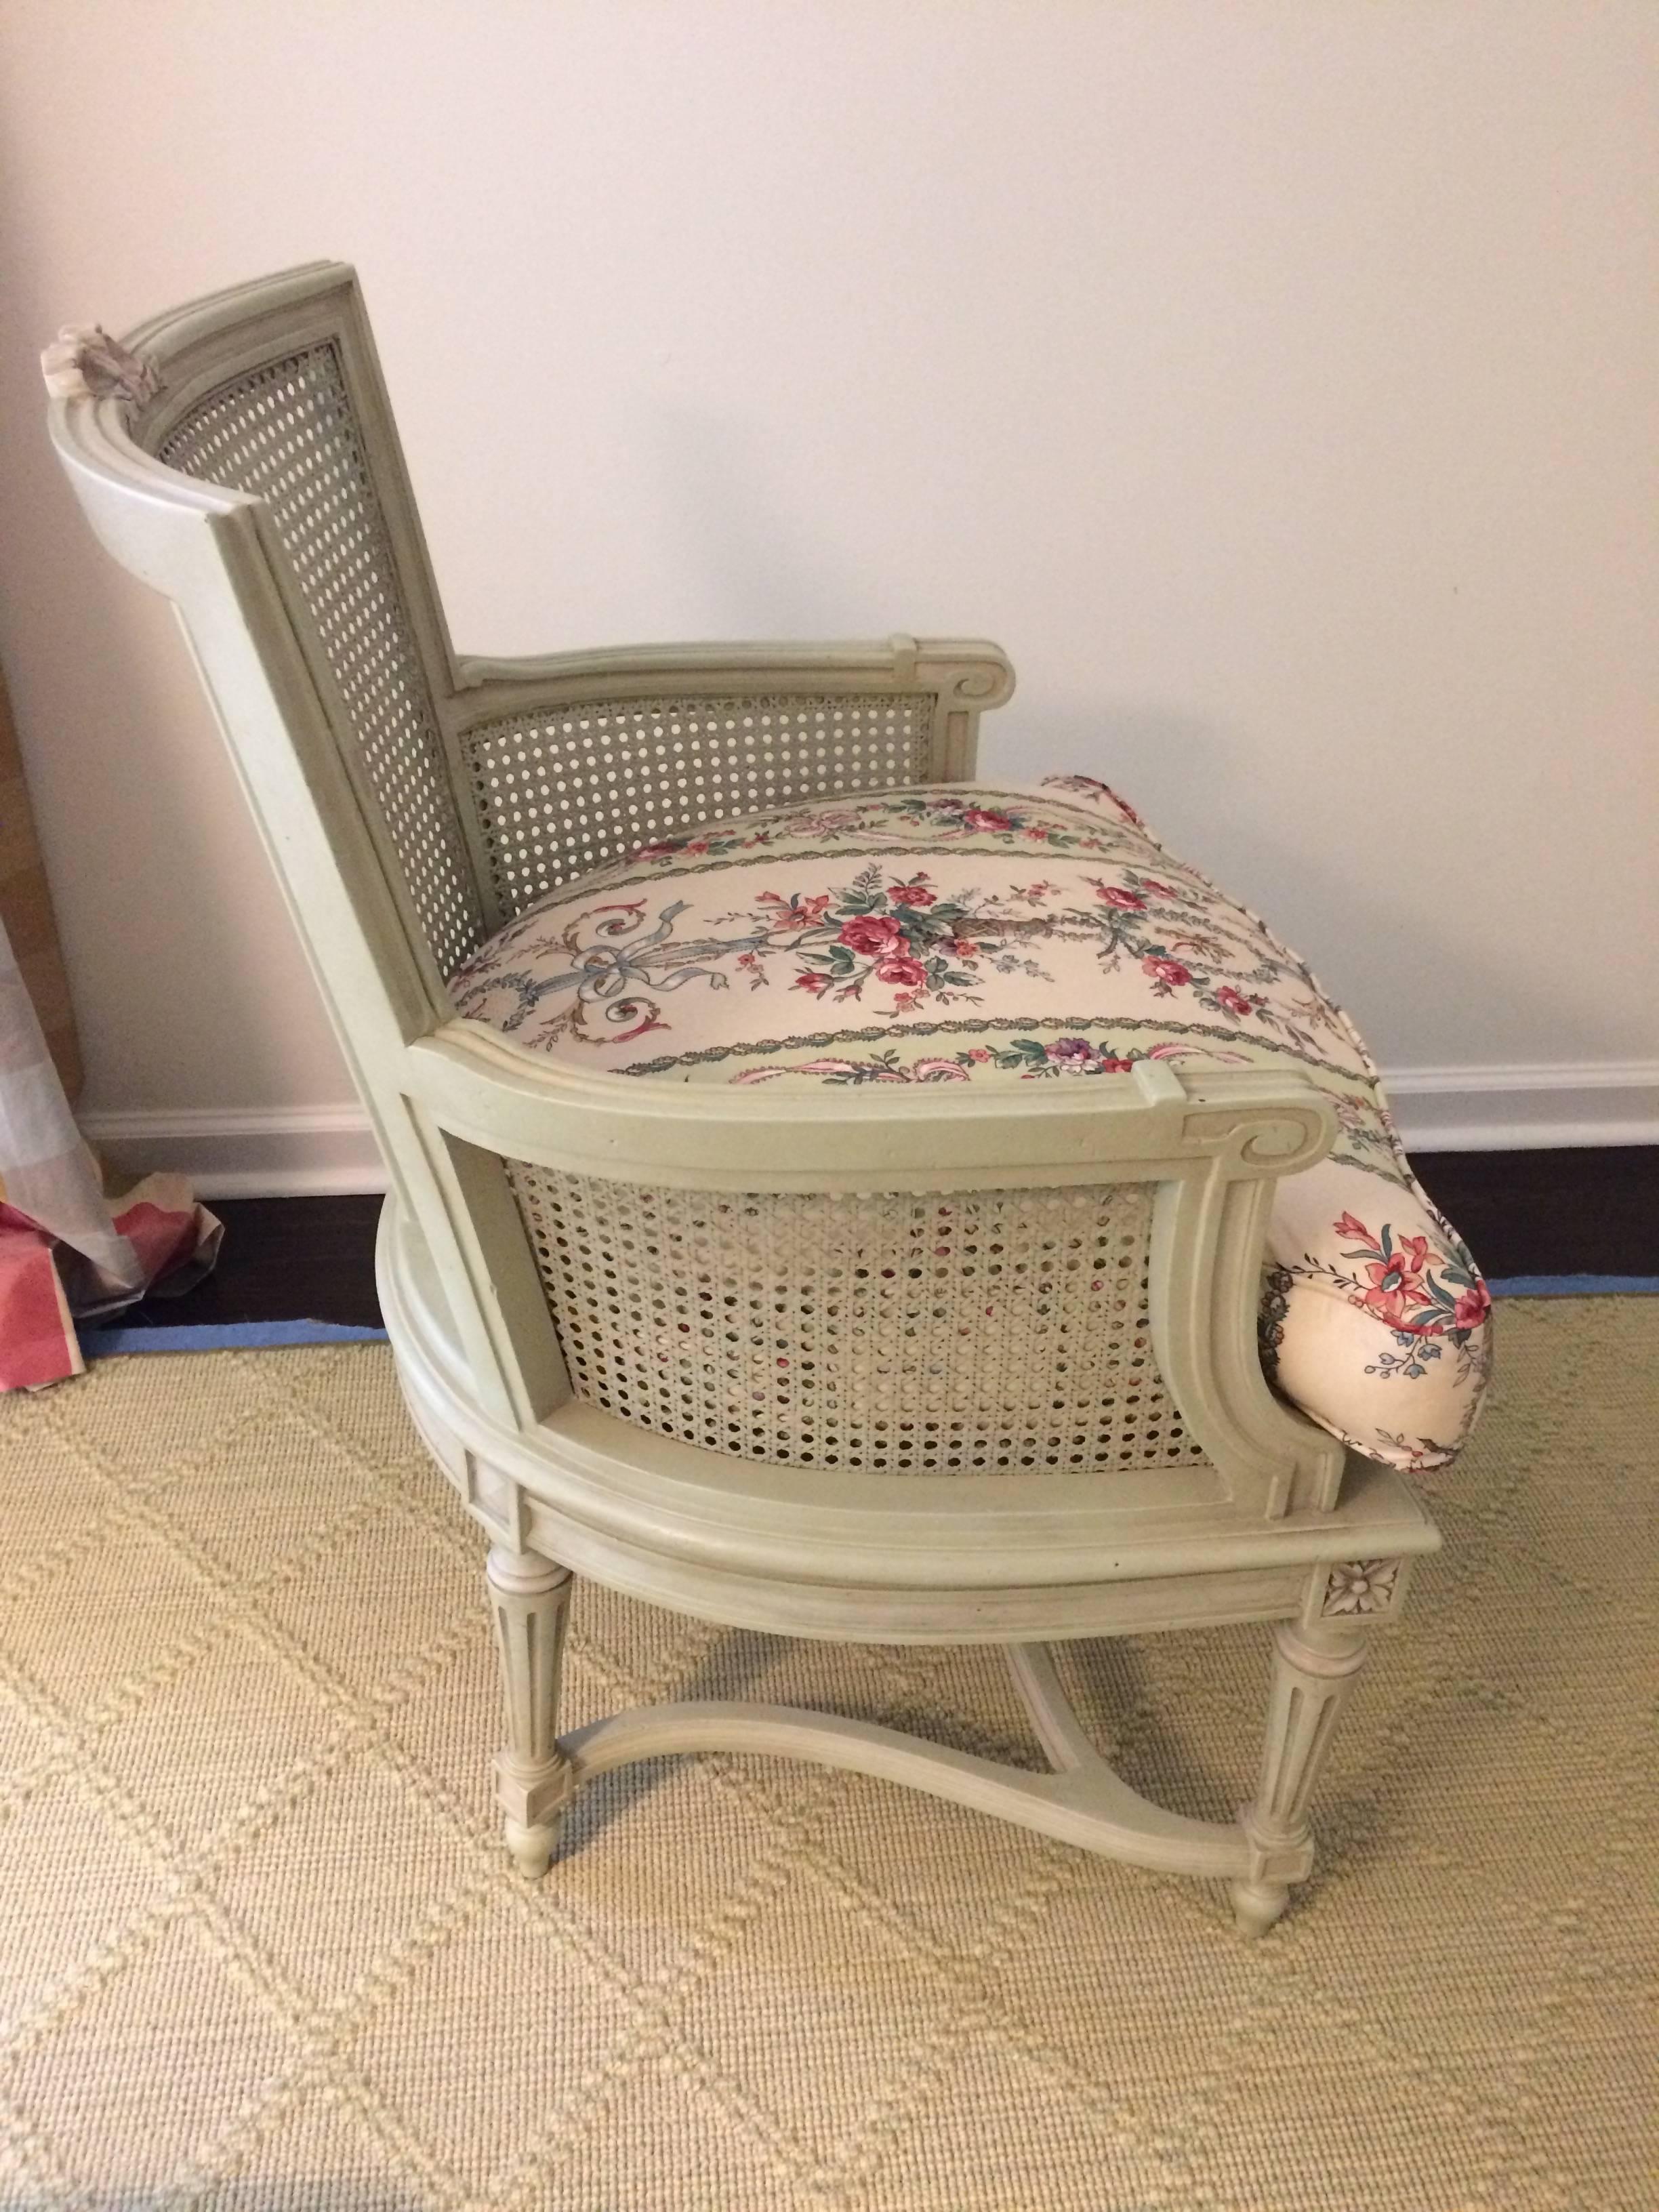 Lovely antique caned and carved armchair hand-painted in the Elizabeth O'neil school of painted finishes in a soothing celadon green. Cushion is Schumacher fabric.